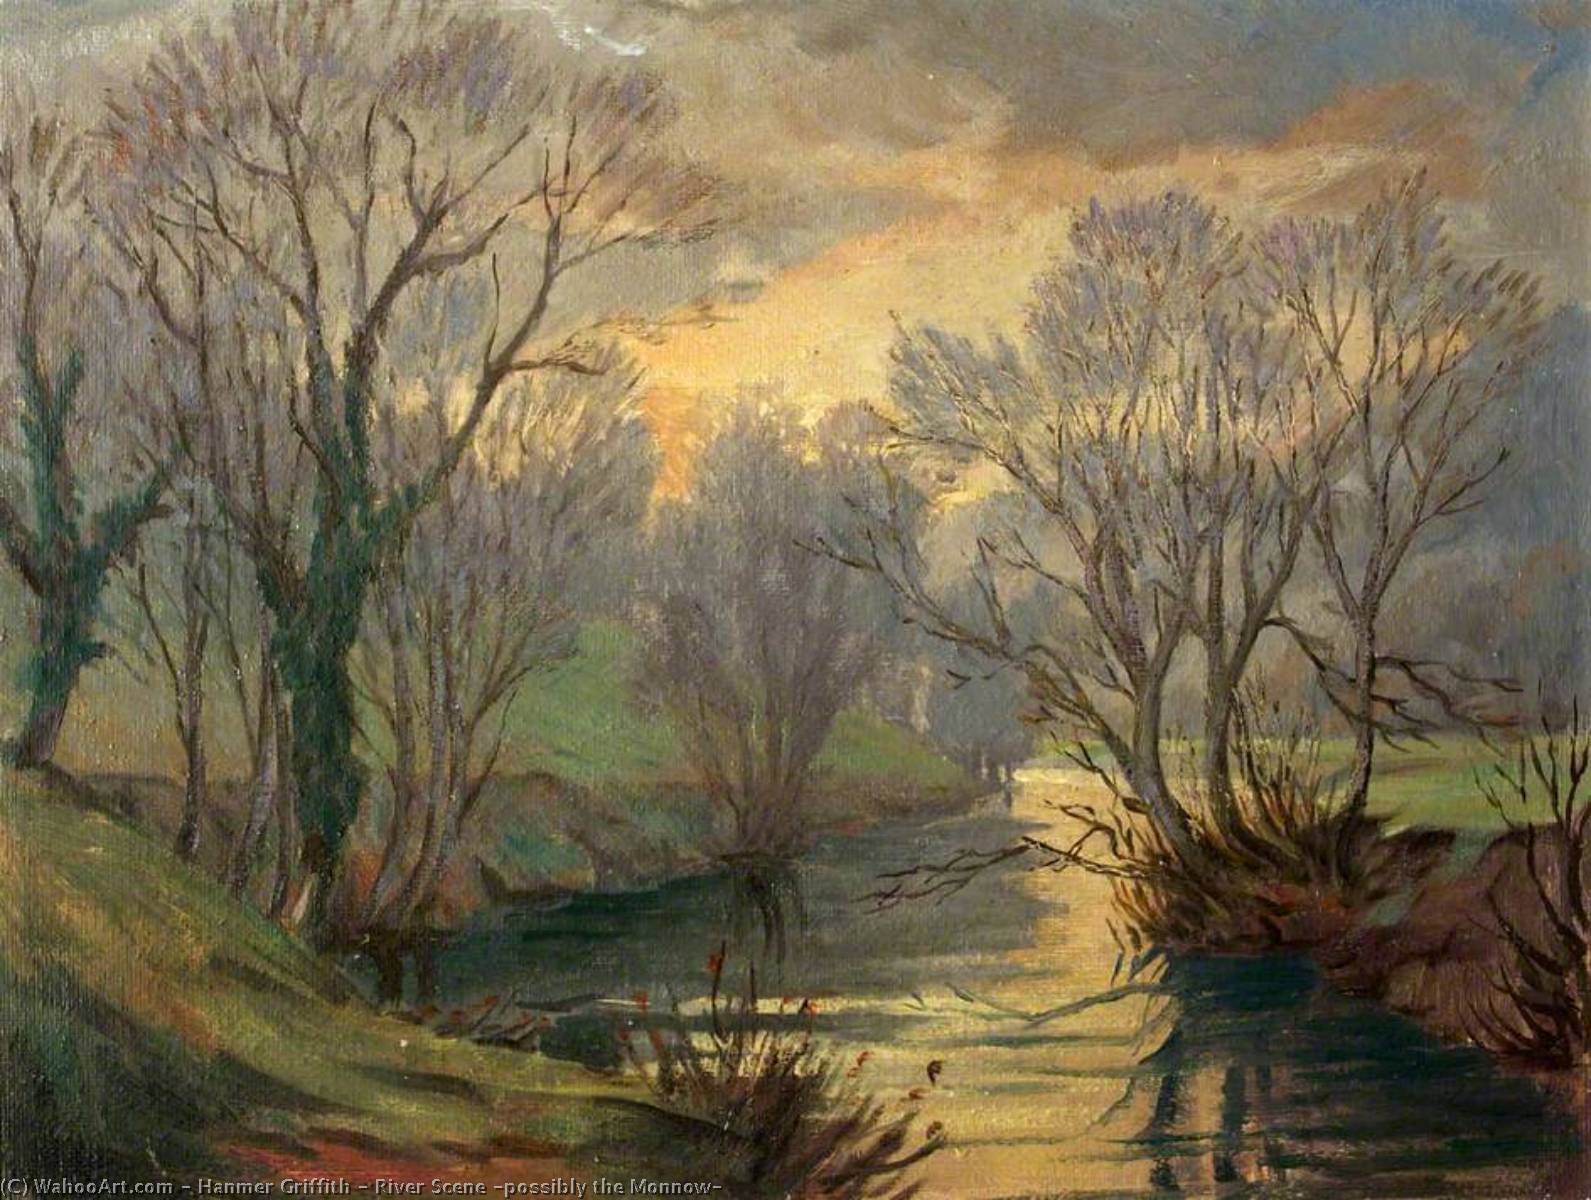 River Scene (possibly the Monnow) by Hanmer Griffith Hanmer Griffith | ArtsDot.com